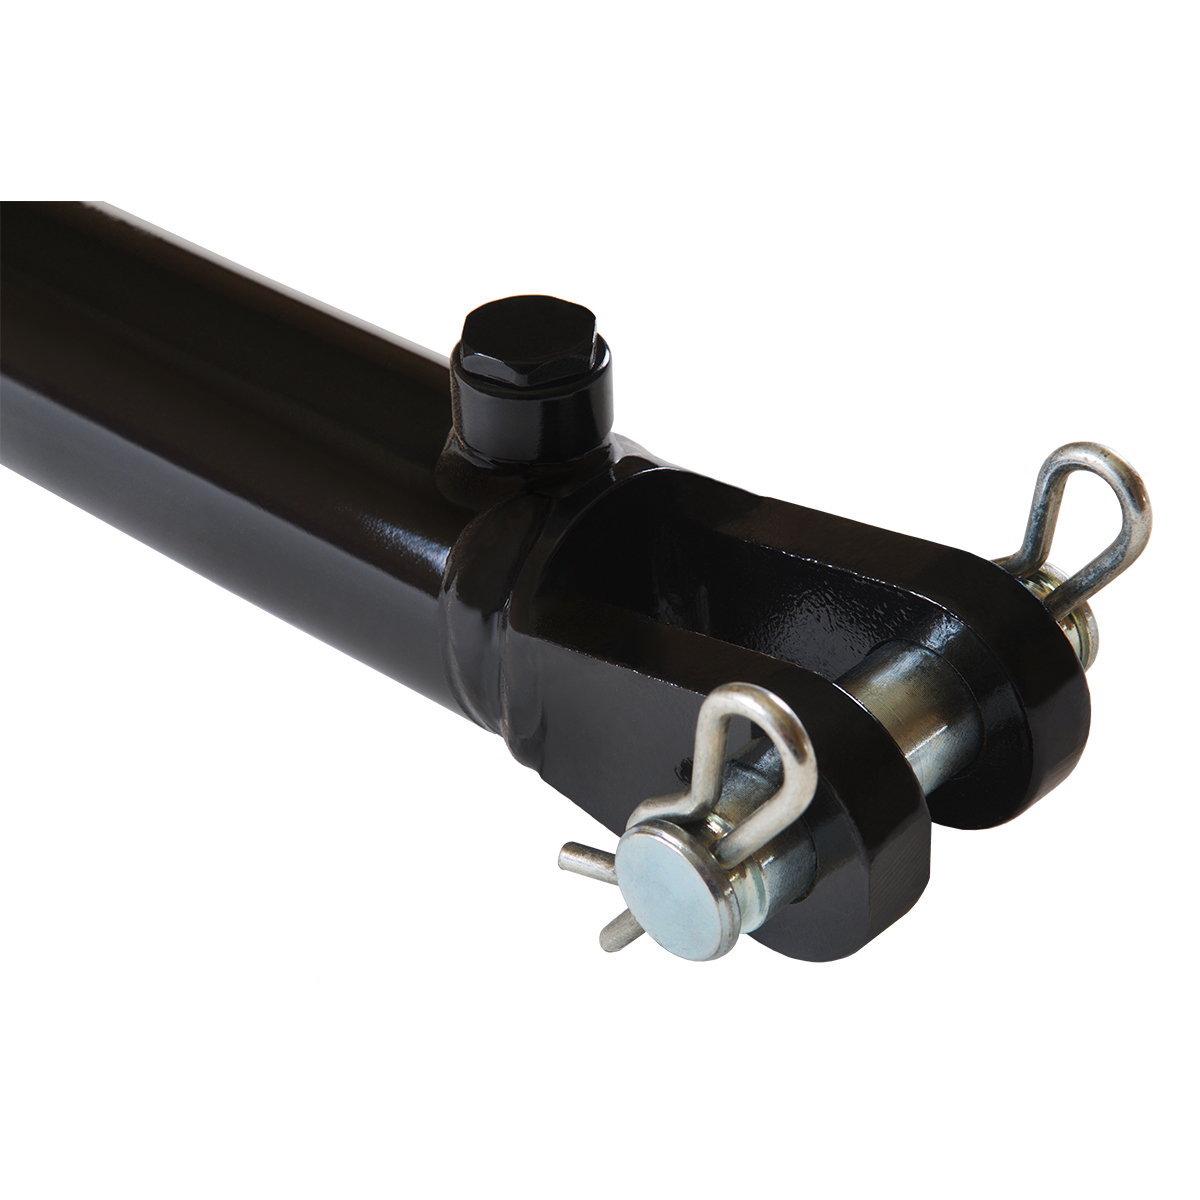 2 bore x 6 stroke hydraulic cylinder, welded clevis double acting cylinder | Magister Hydraulics